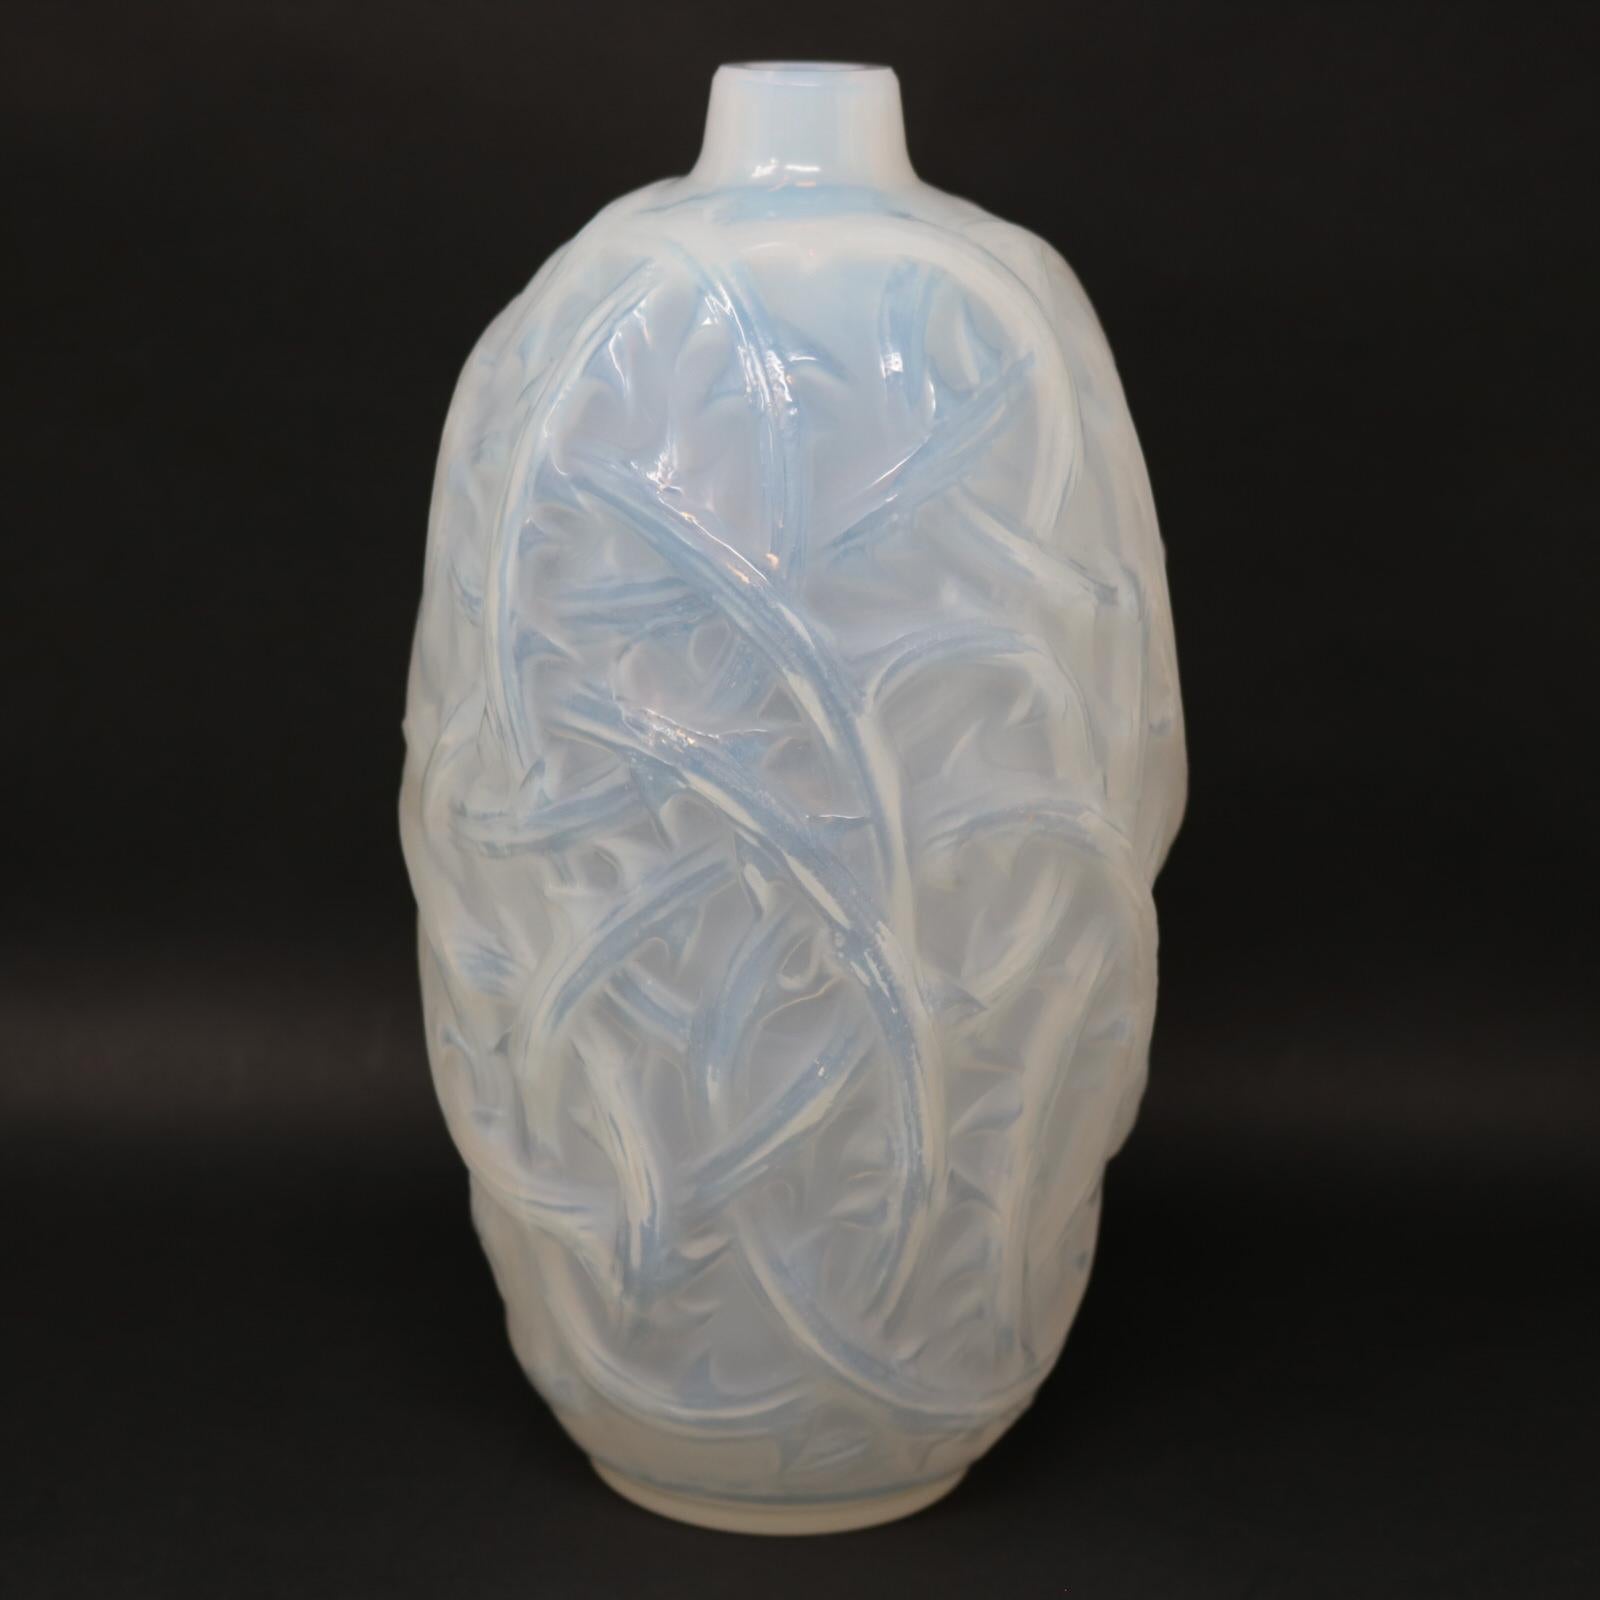 Rene Lalique Opalescent Glass 'Ronces' vase. This pattern depicts entwined bramble branches. Moulded makers mark, 'R LALIQUE', to the underside. Book reference: Marcilhac 946.